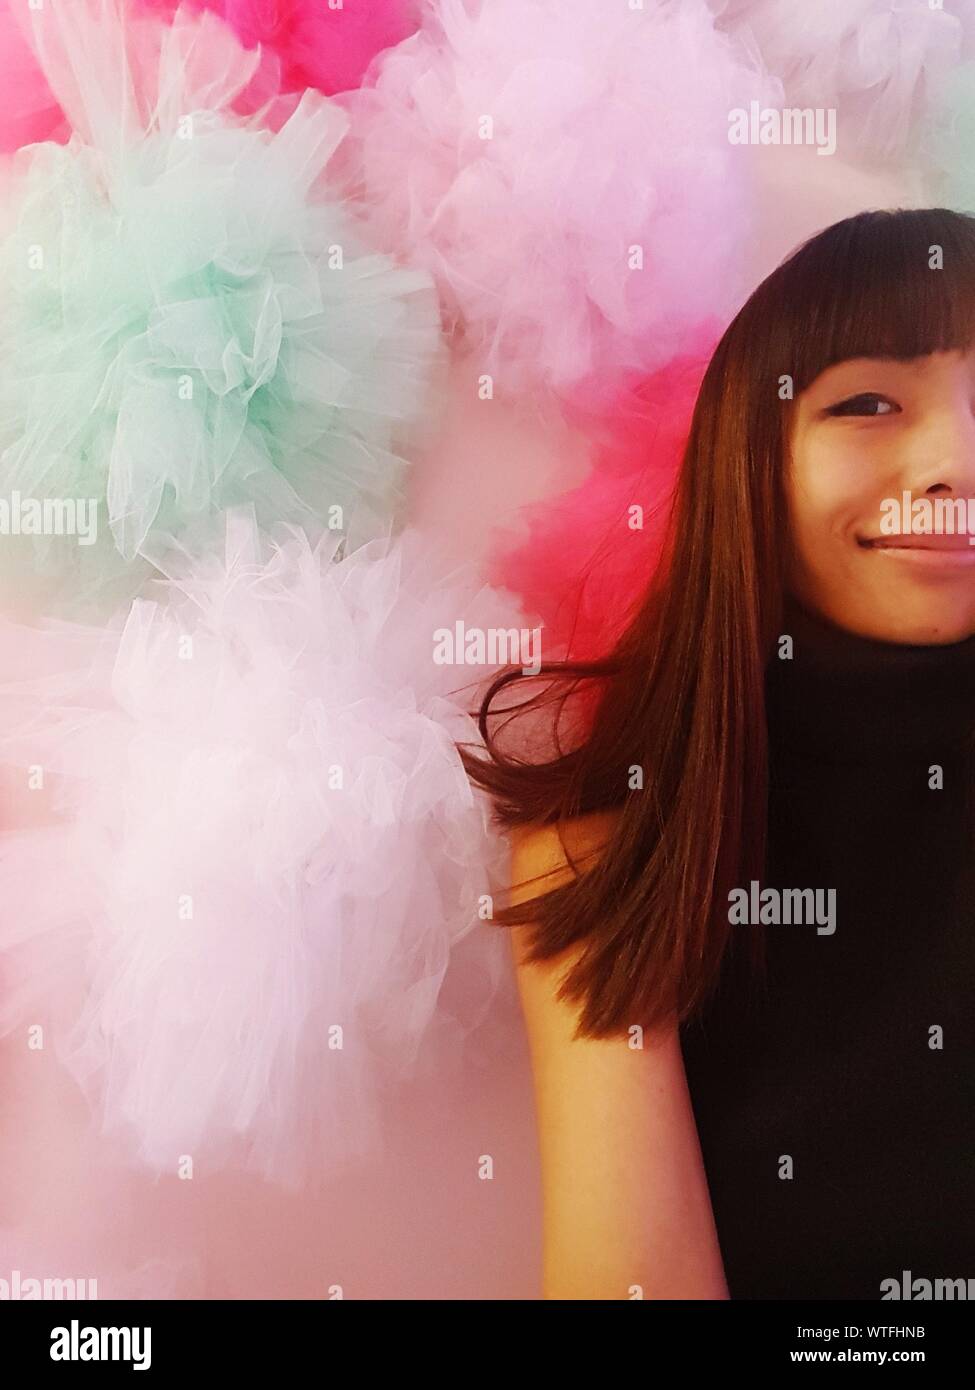 Portrait Of Smiling Young Woman By Tulle Netting Stock Photo